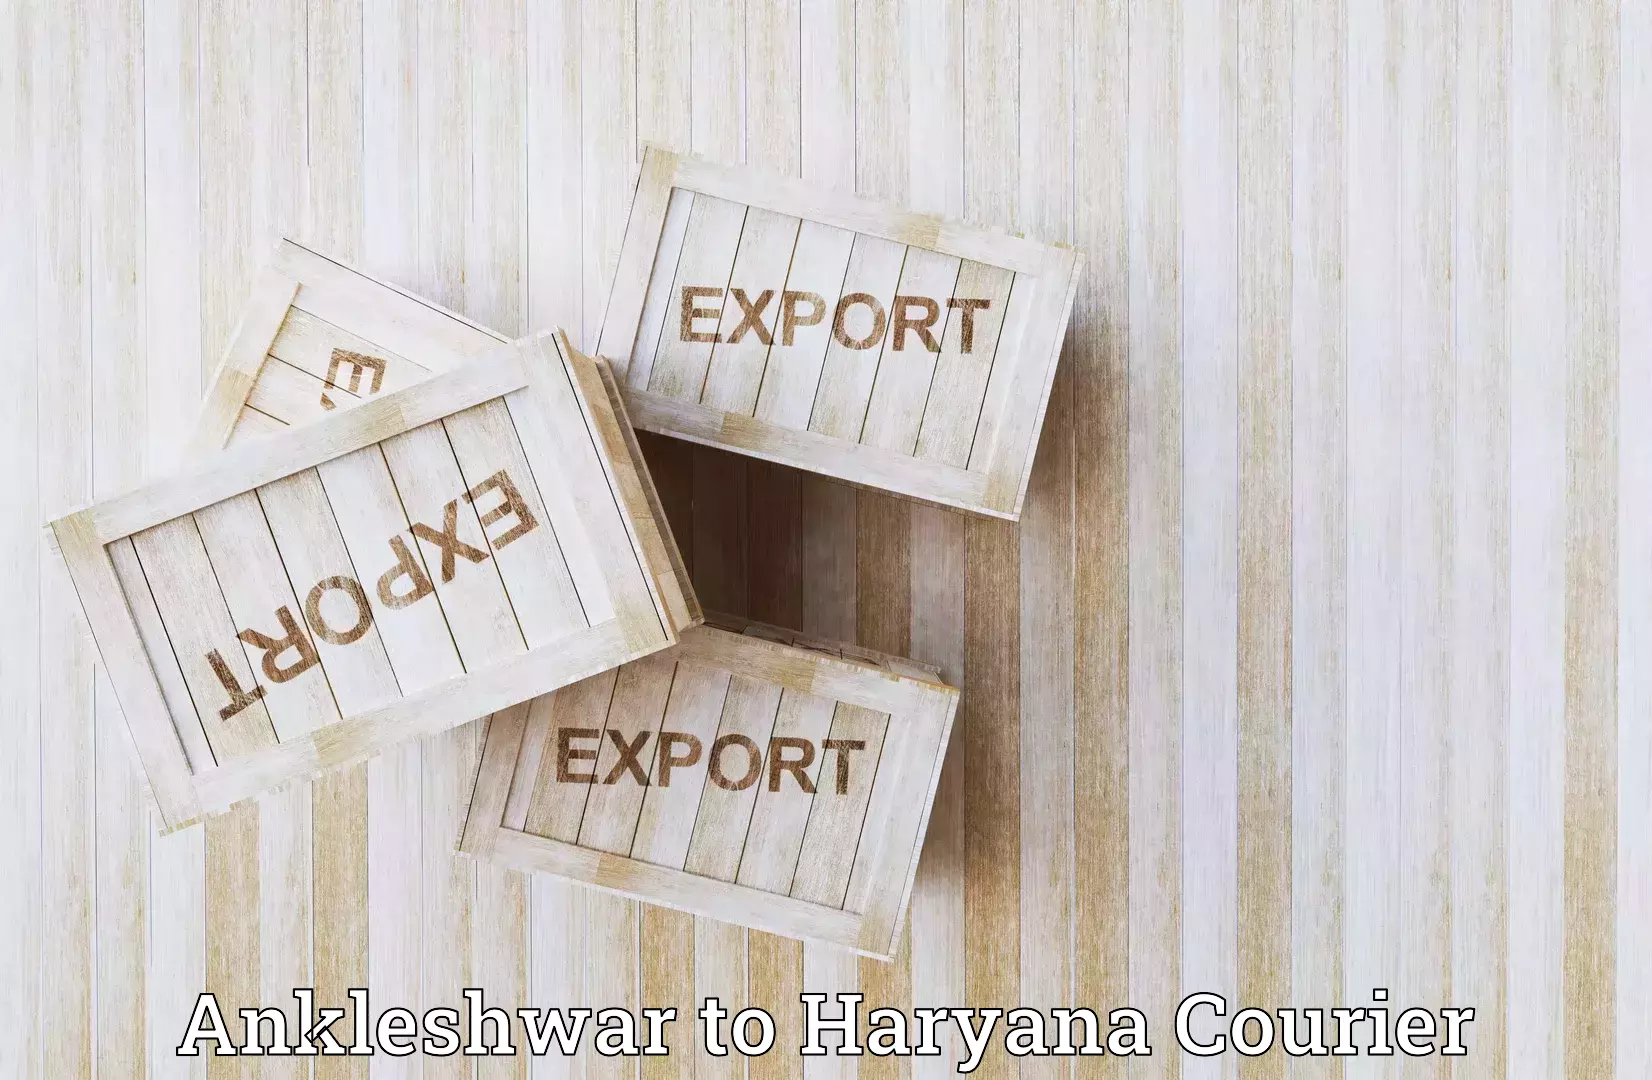 Efficient shipping operations in Ankleshwar to Siwani